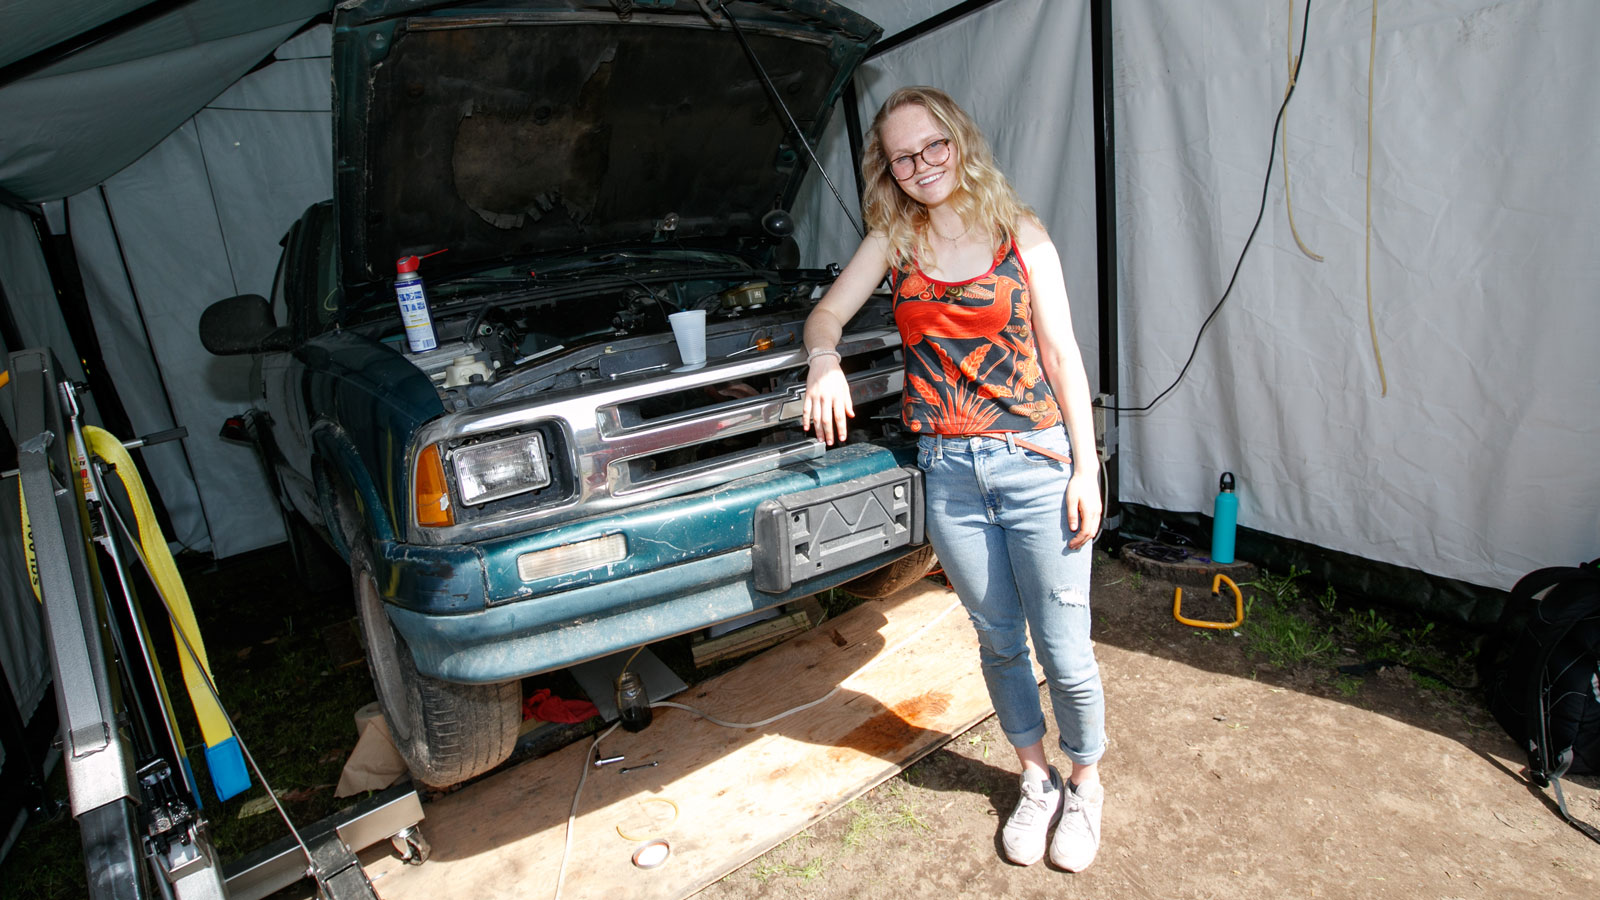 Ellie Cooper with the pickup truck that she converted to electric power